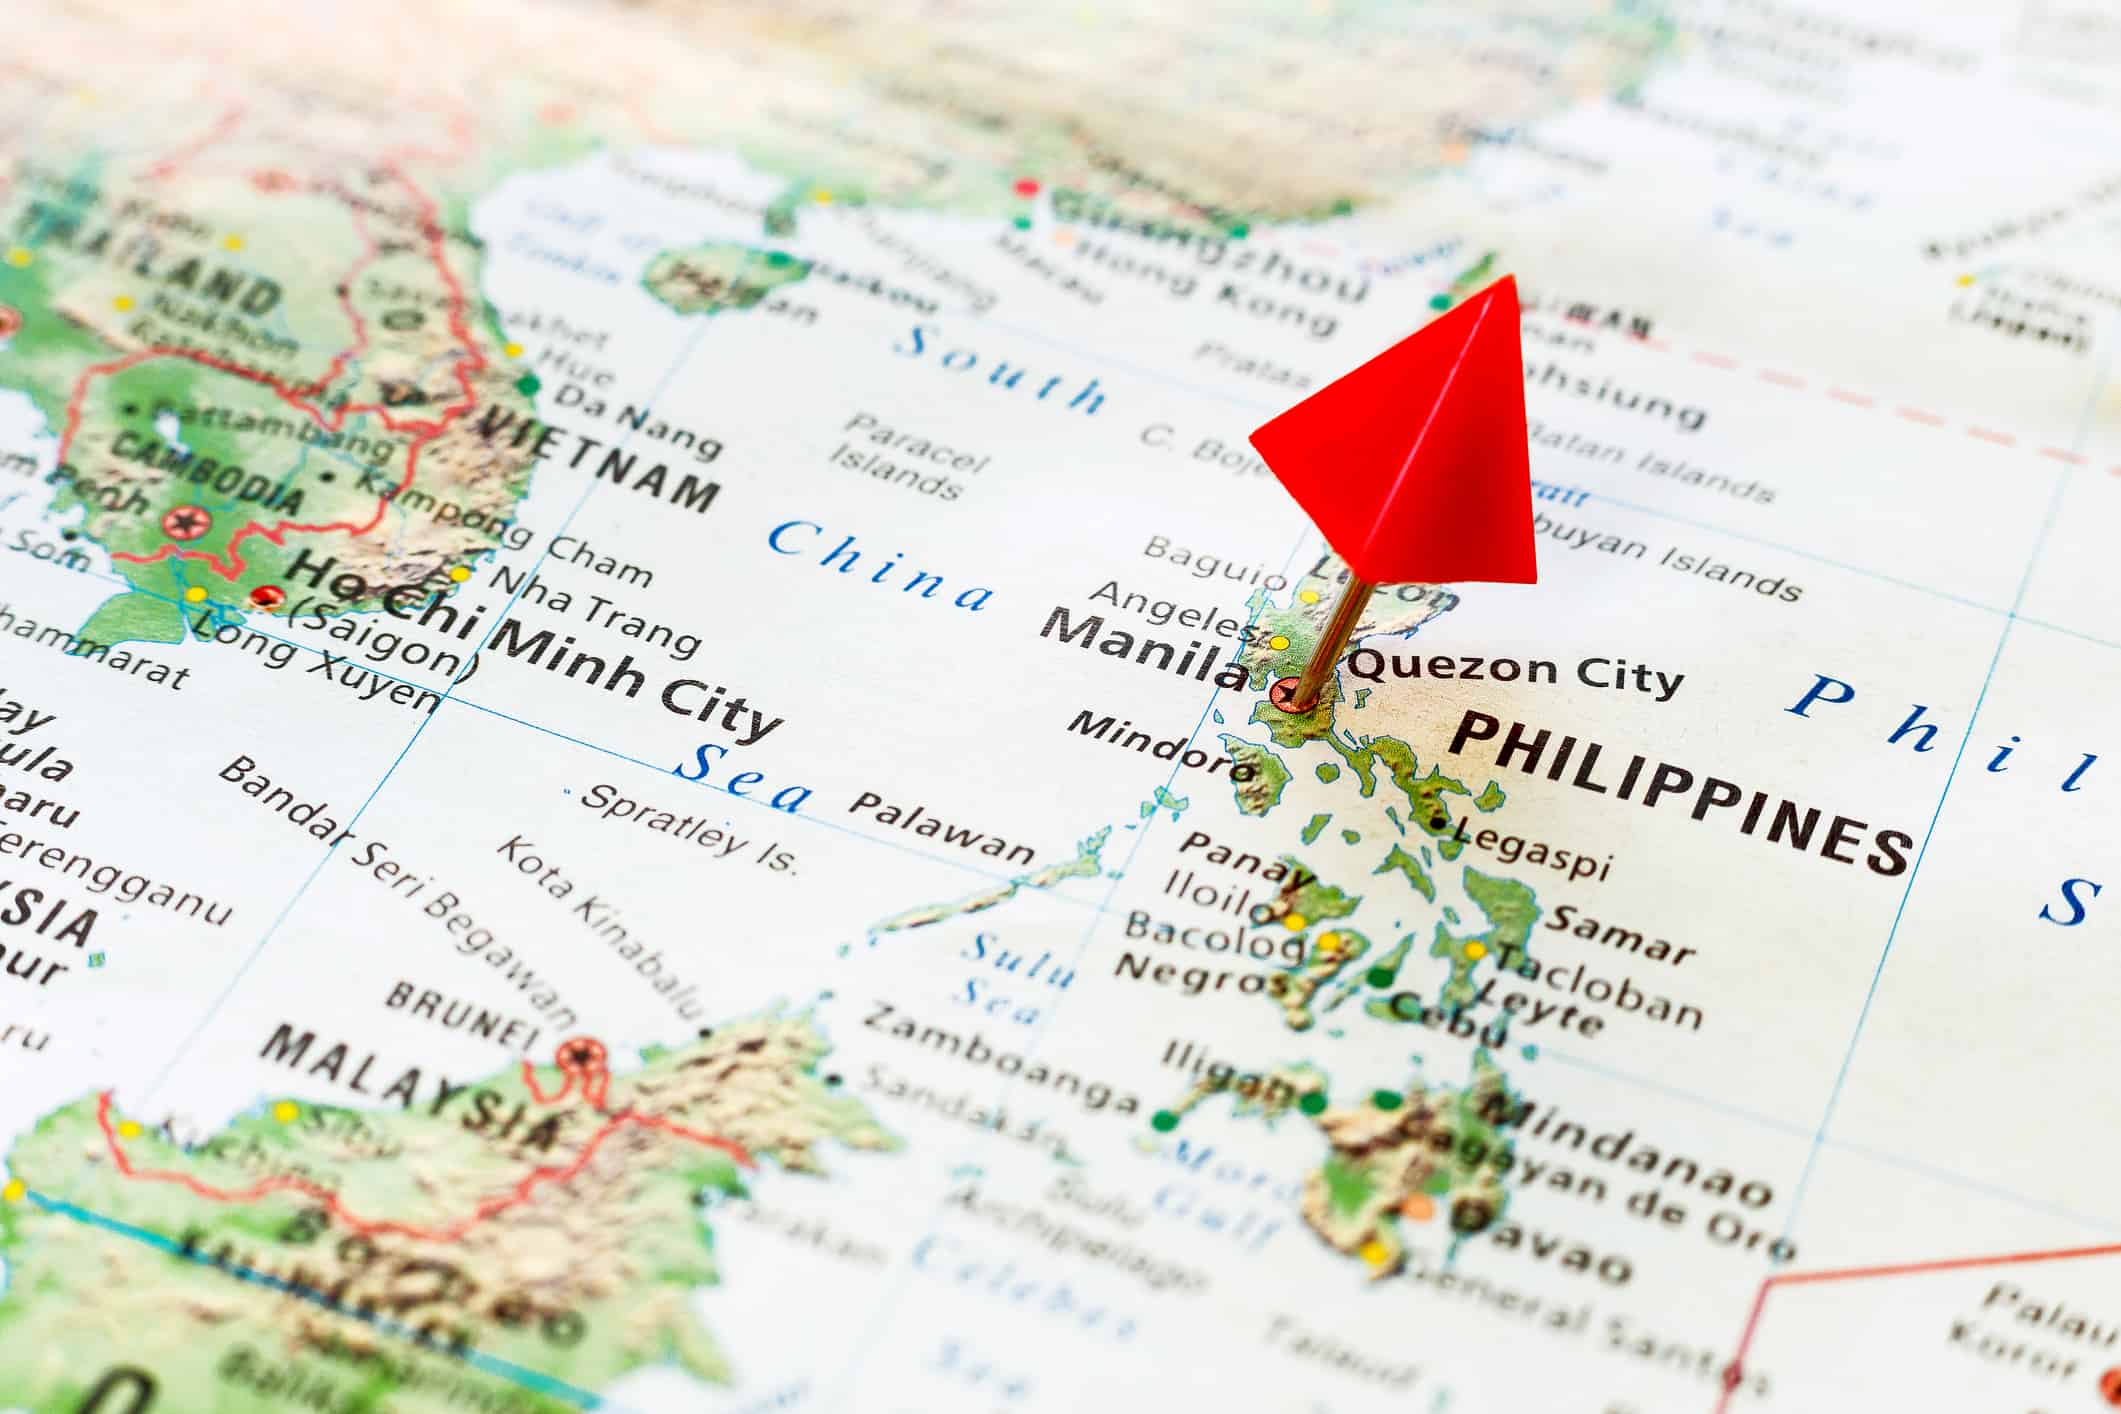 World map with pin on city of Philippines, Manila.